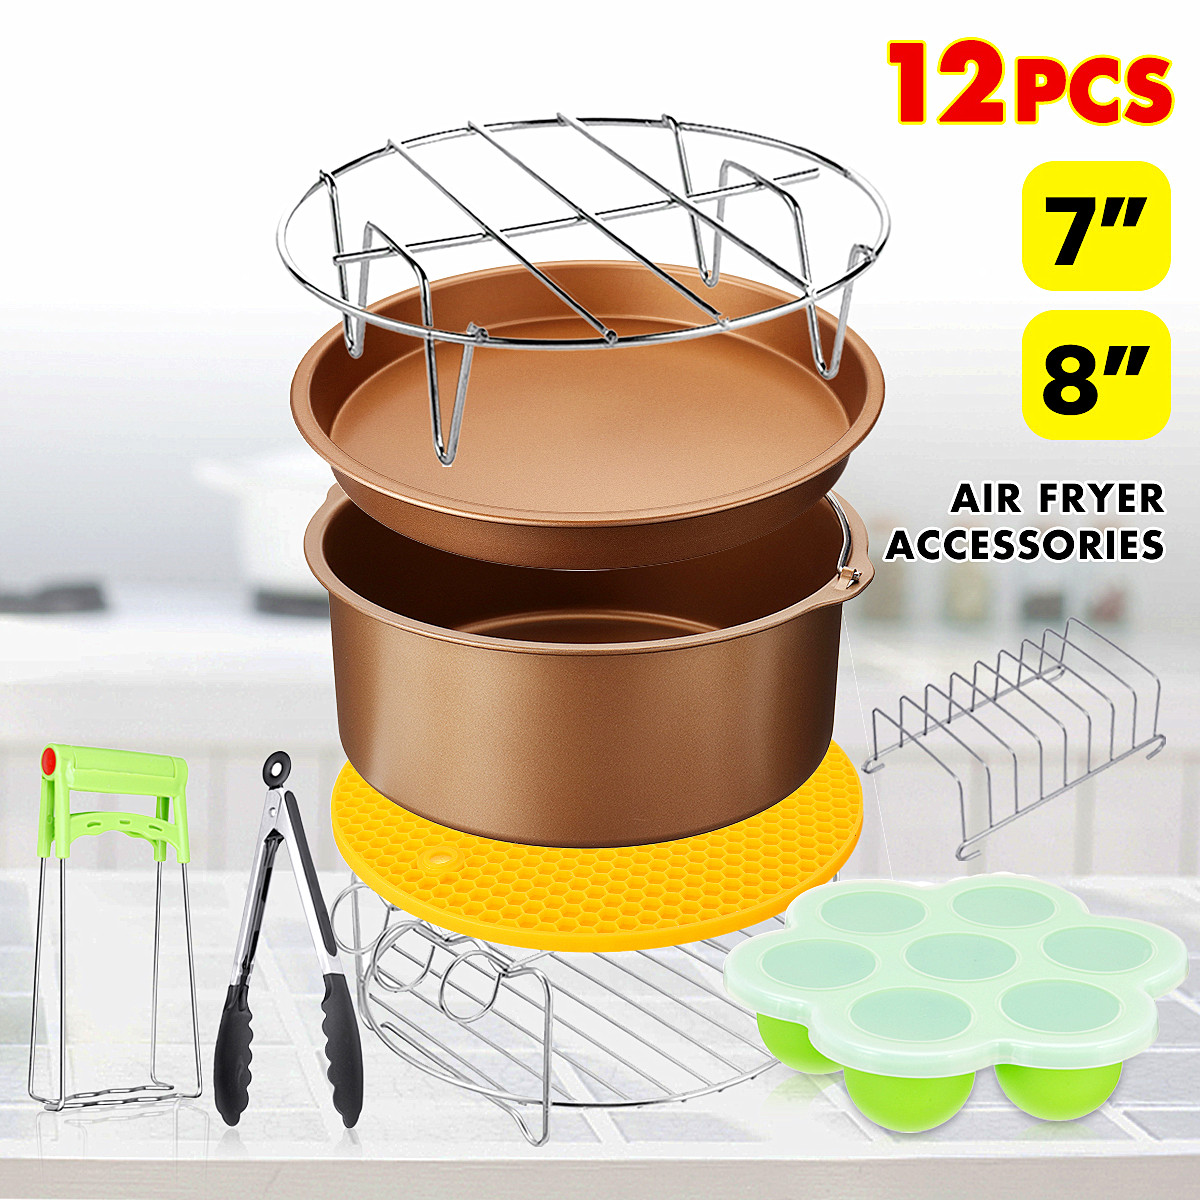 12Pcs-7quot8quot-Air-Fryer-Accessories-Kitchen-Cooking-Baking-Cake-Pizza-Barbecue-Pan-1634255-2